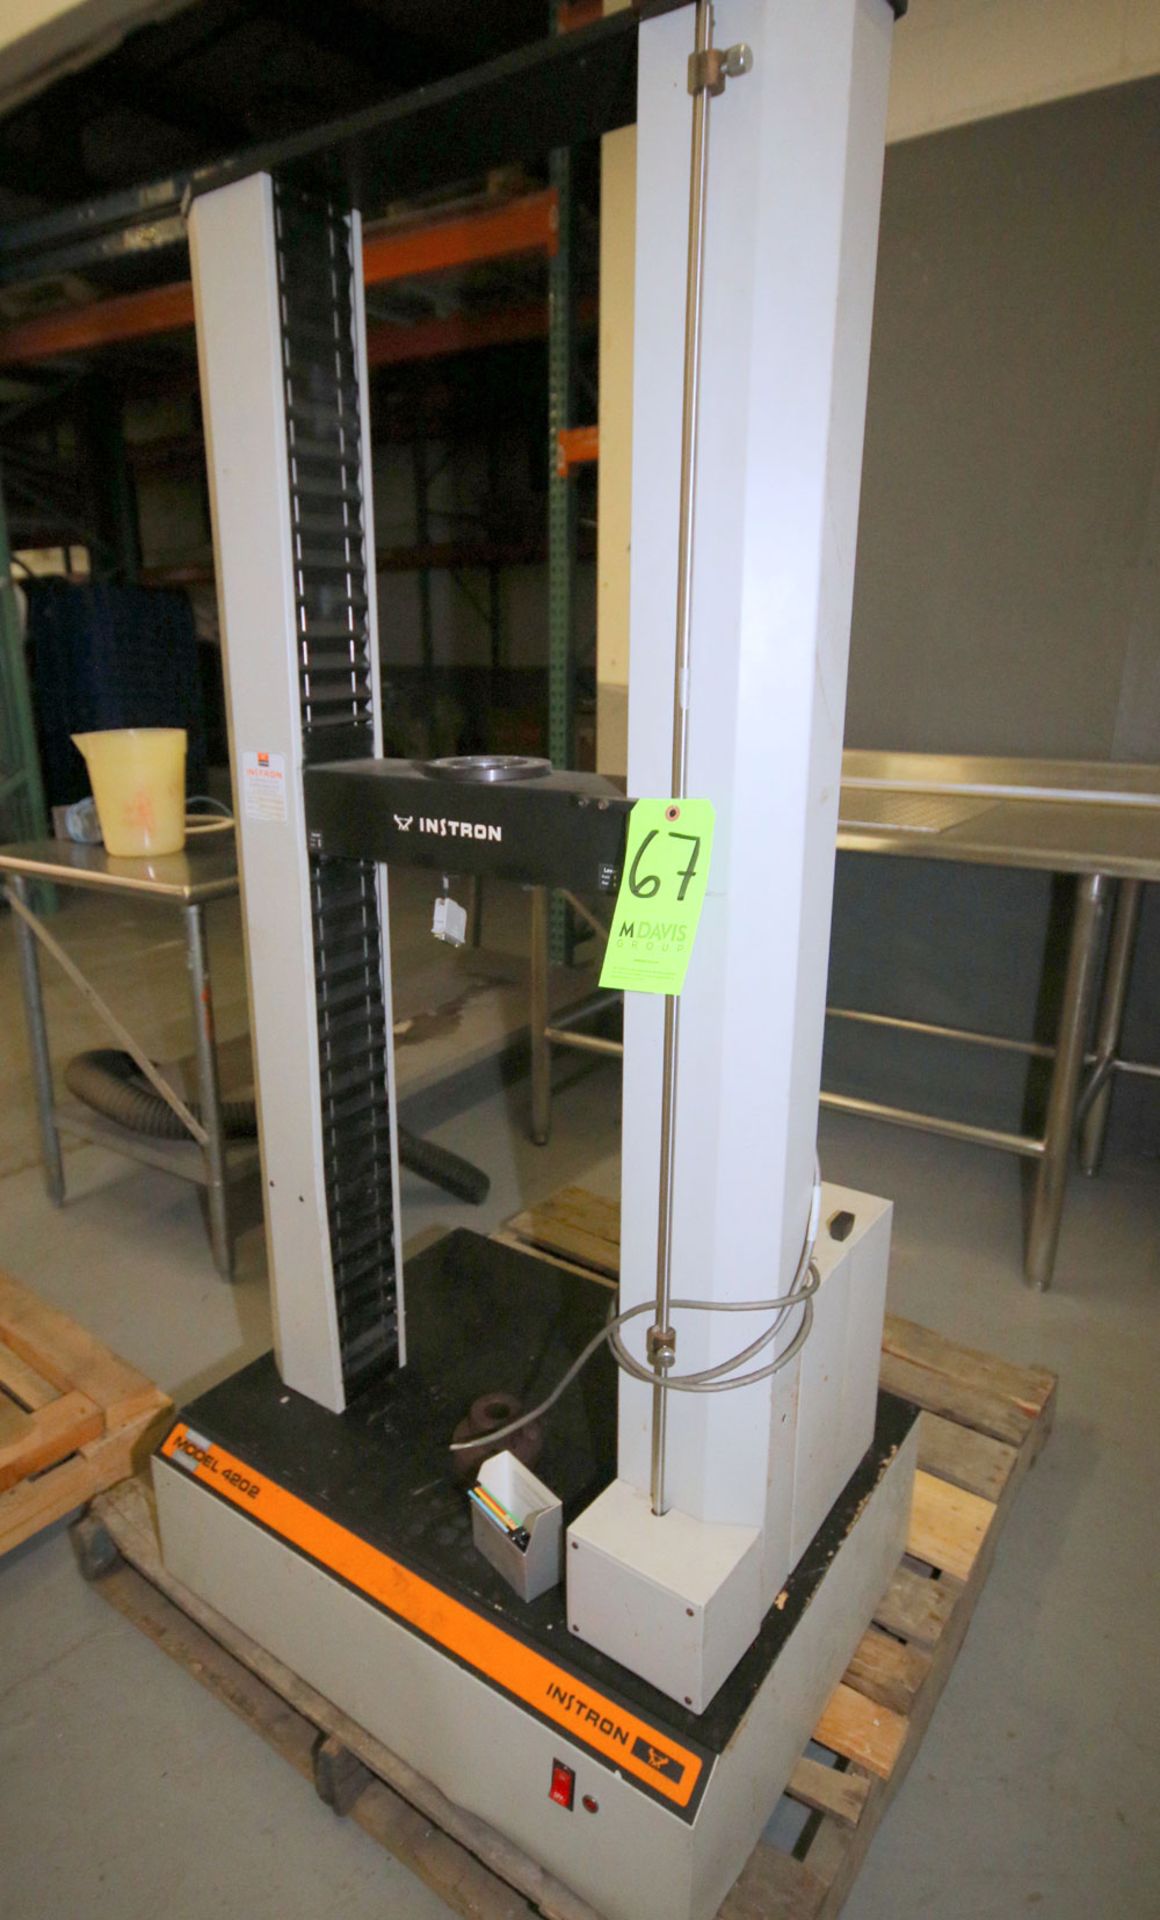 Instron Tensile Compression Tester, S/N 928, 2,000 Tension Load, with Data Recording Computer